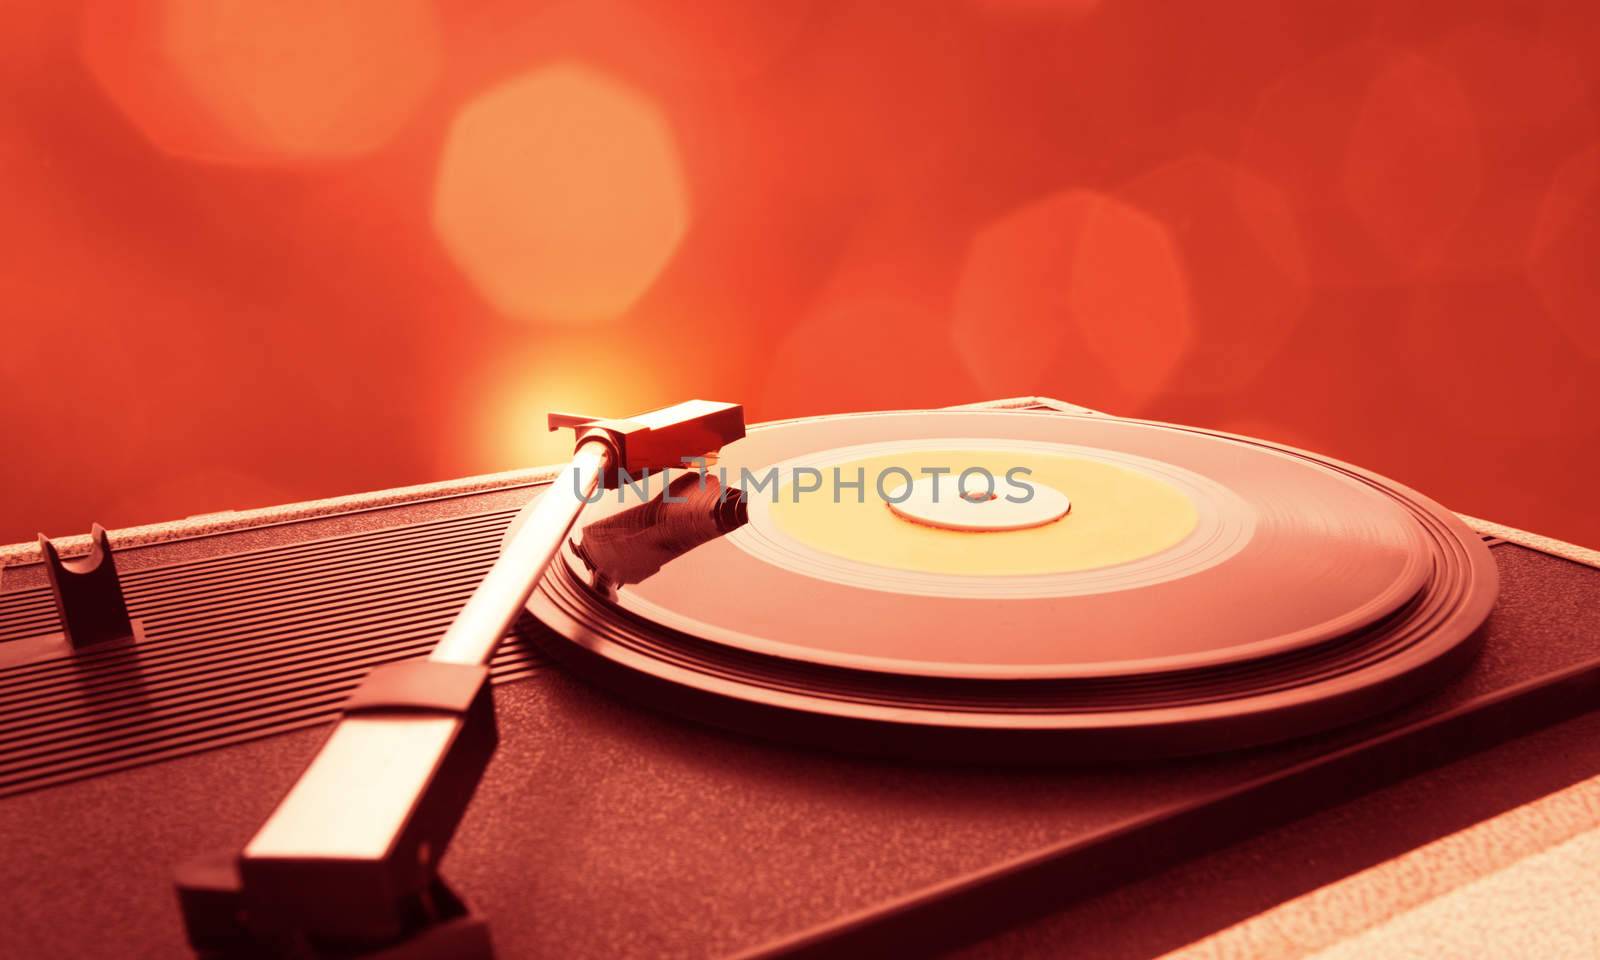  turntable by stokkete